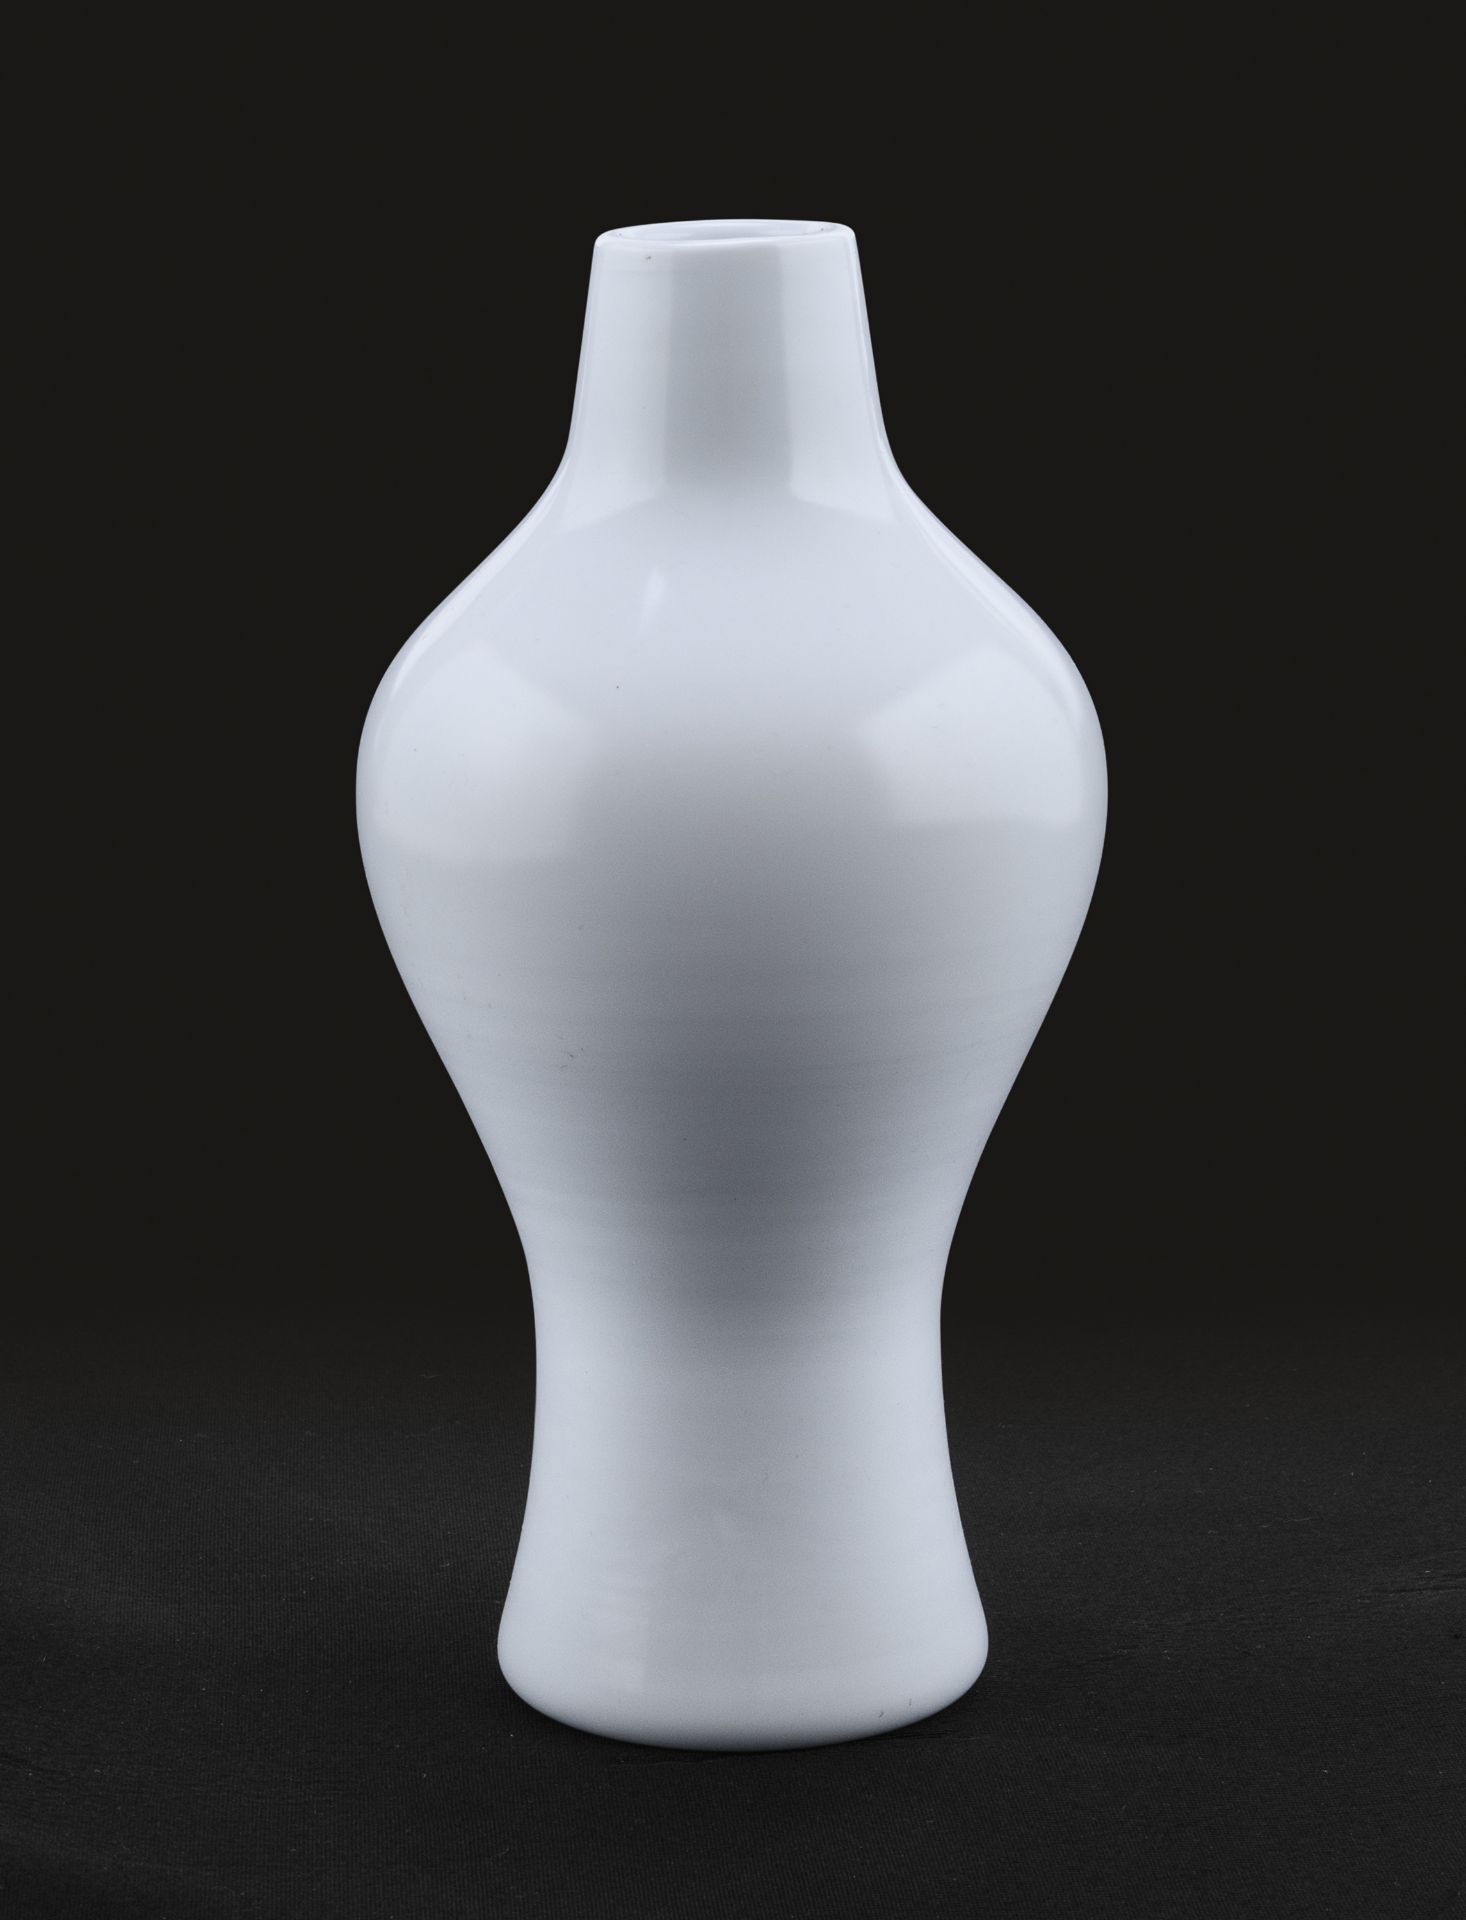 CHINESE VASE DESIGN BY CARLO SCARPA 1970s